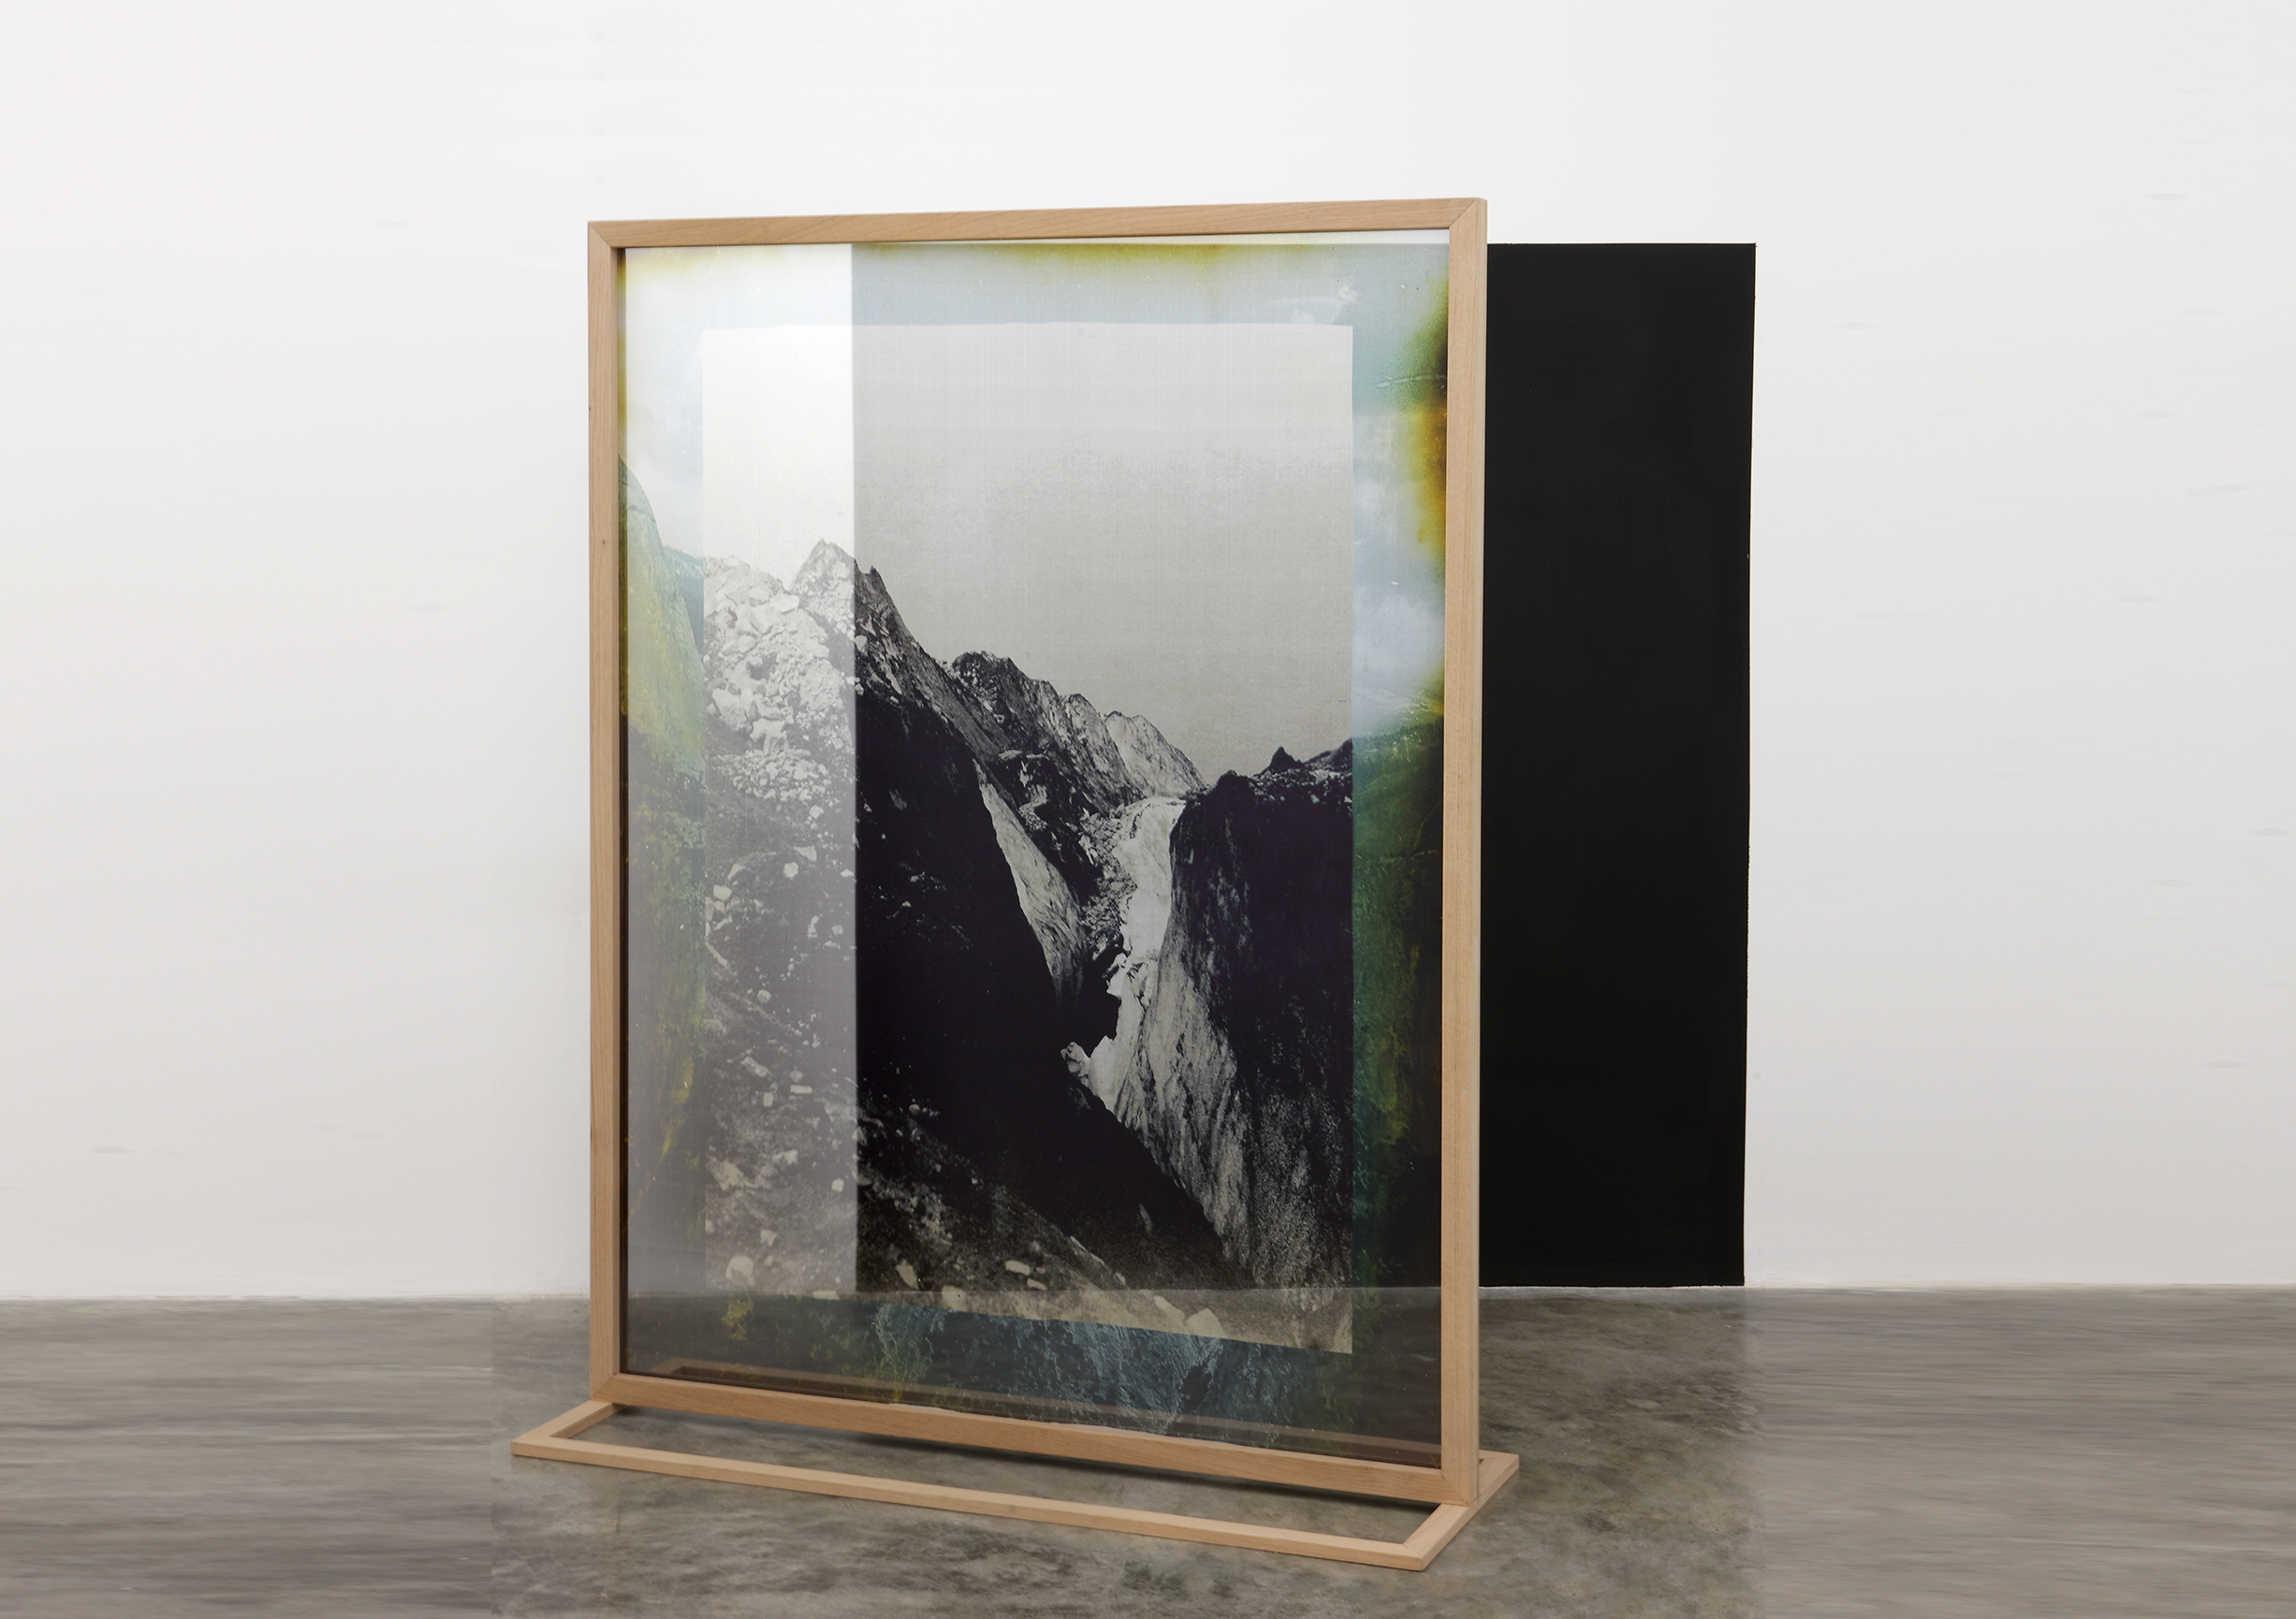  Elena Damiani,    Fading Field No. 1,  2012.   Digital print on silk chiffon, wood structure, and black matte paint on wall, 73 5/8 x 56 ¼ inches.   The Museum of Modern Art. Promised gift of Patricia Phelps de Cisneros through the Latin American an